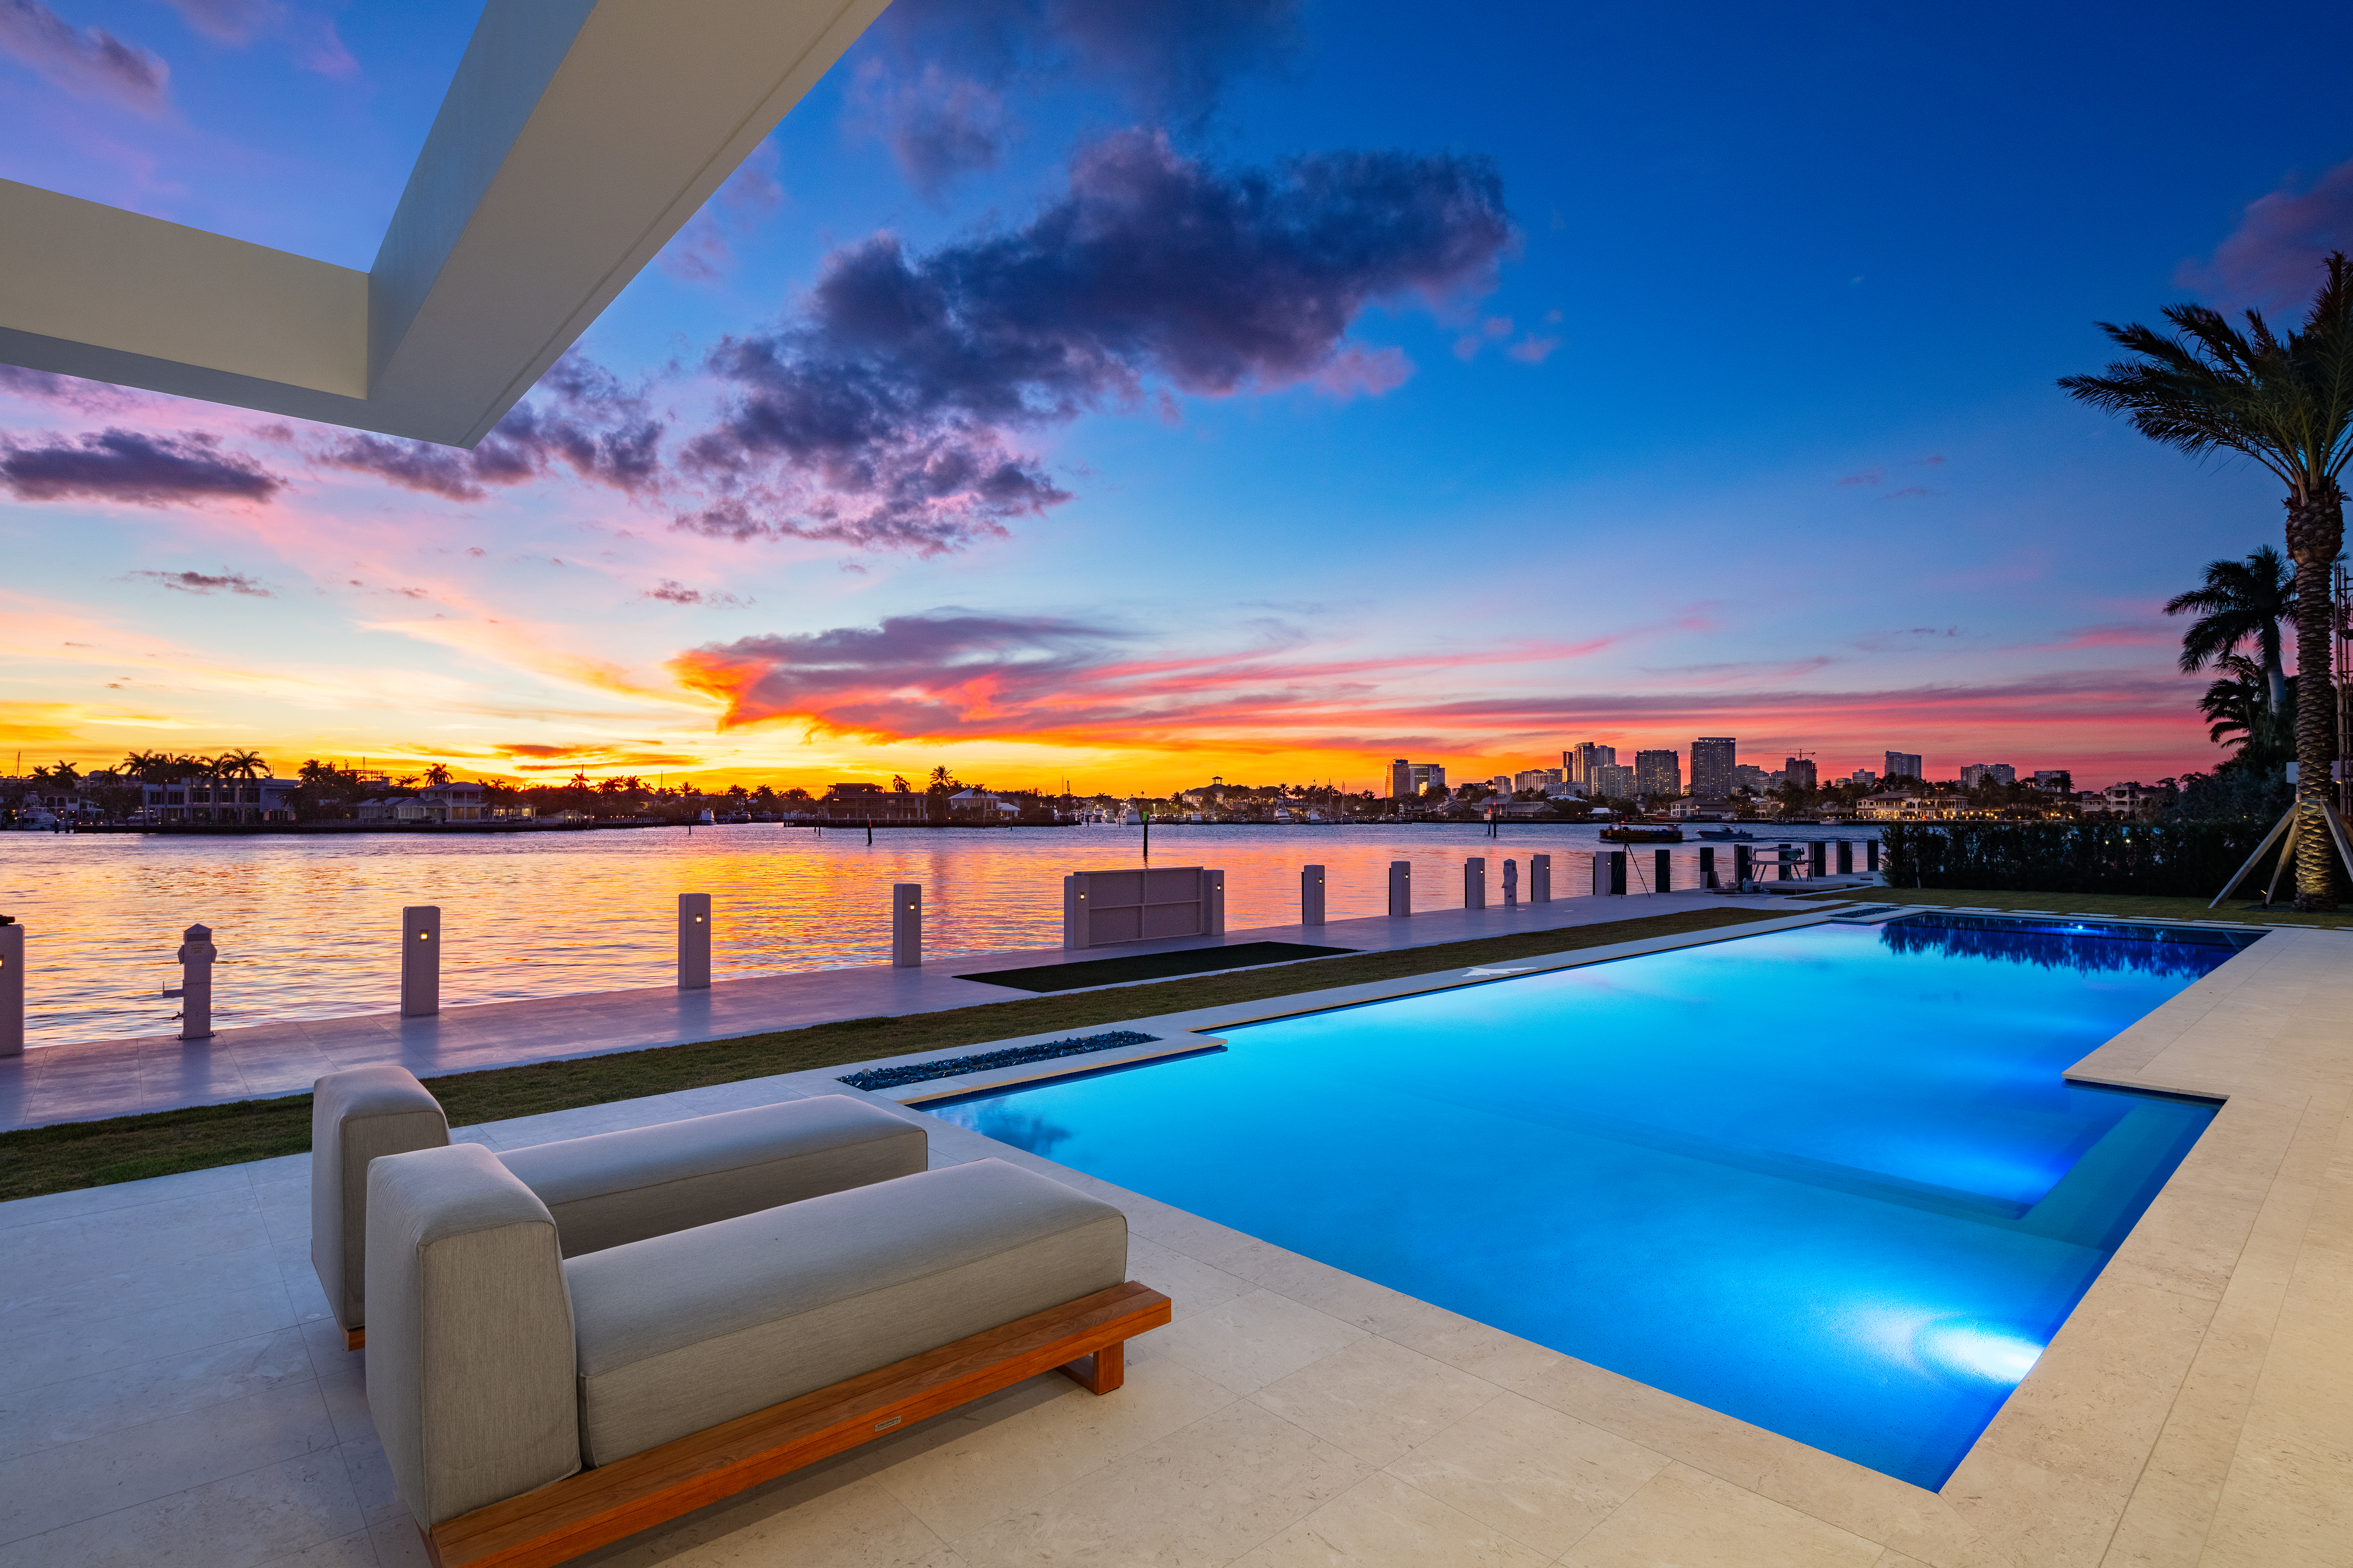 Pool at sunset of Compass listing 2412 Laguna Drive in Fort Lauderdale